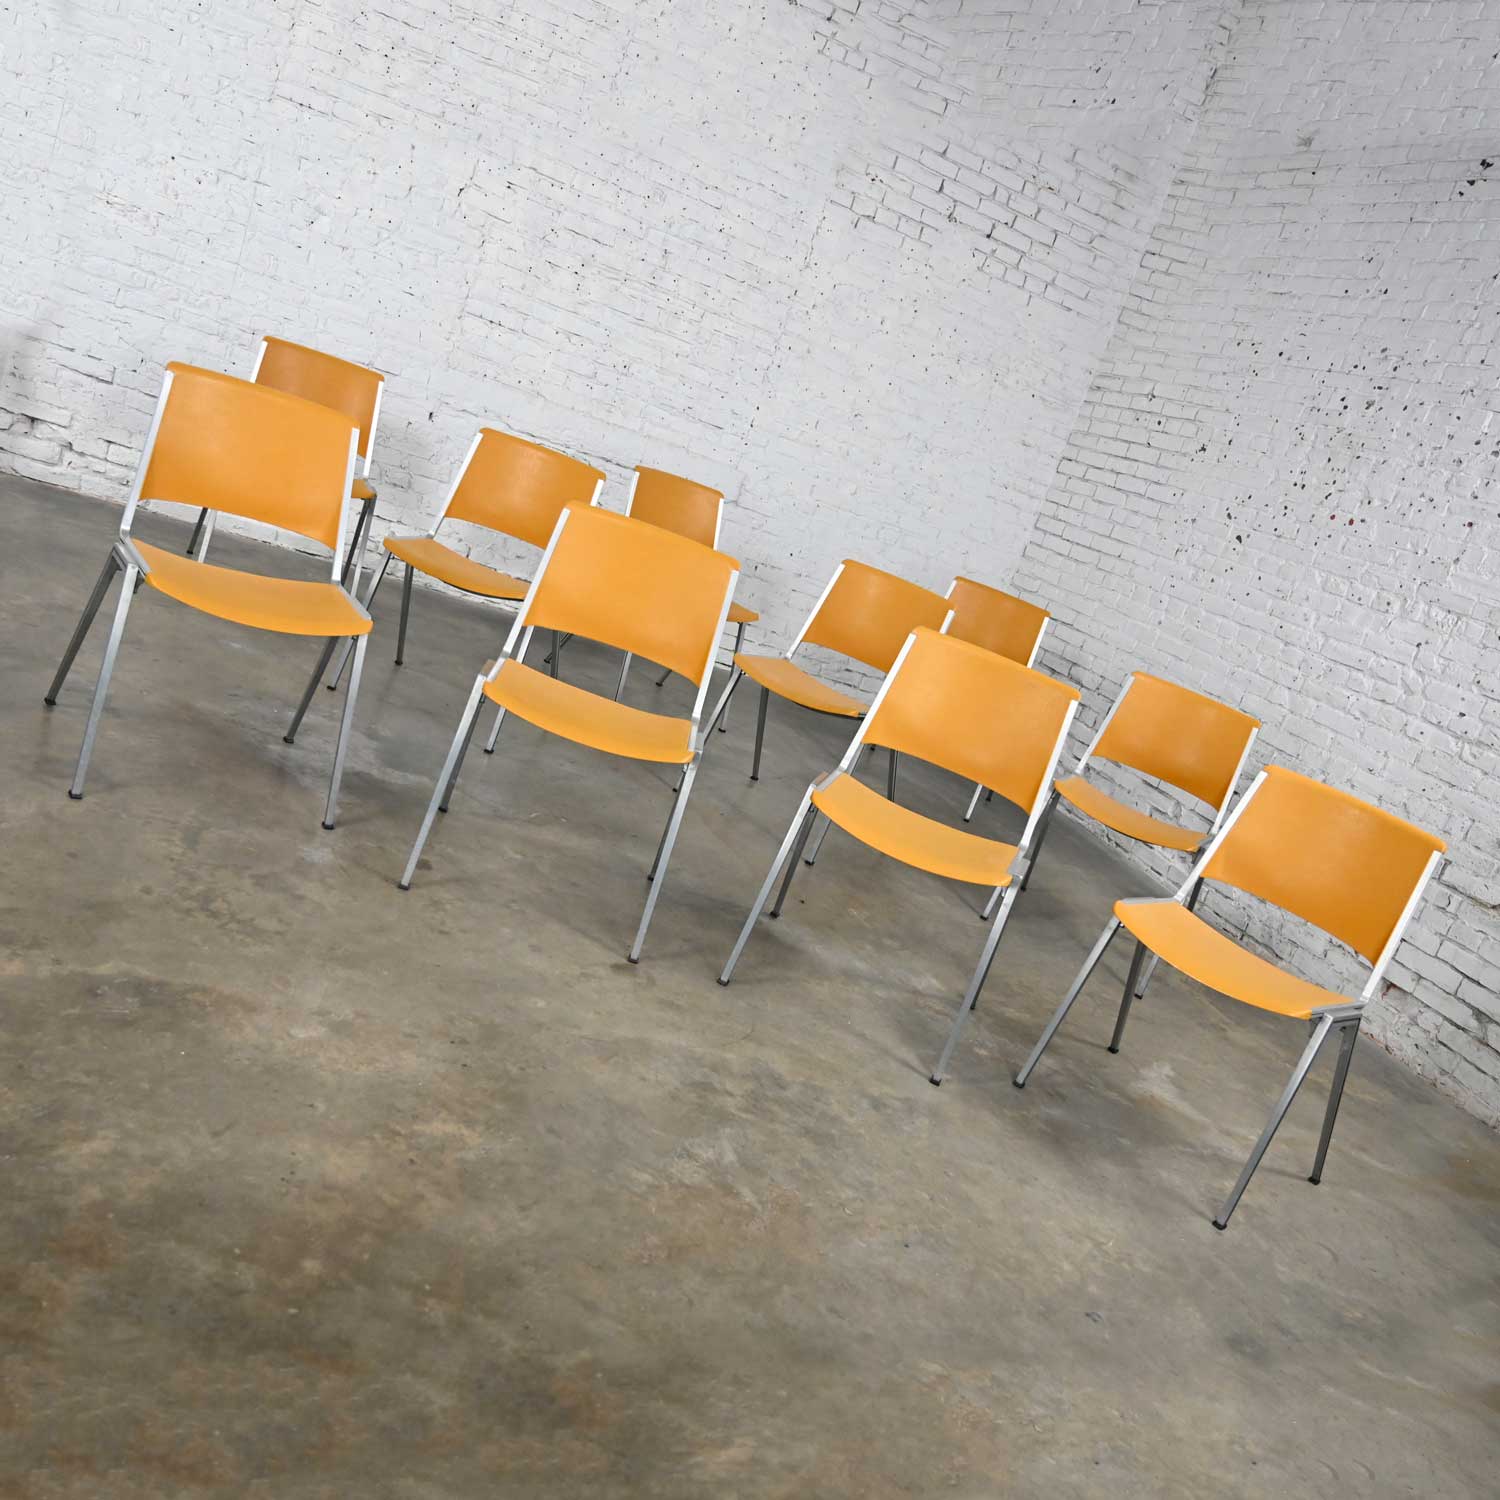 Vintage Aluminum Steelcase Stacking Chairs Model #1278 Yellow Gold Plastic Set of 10